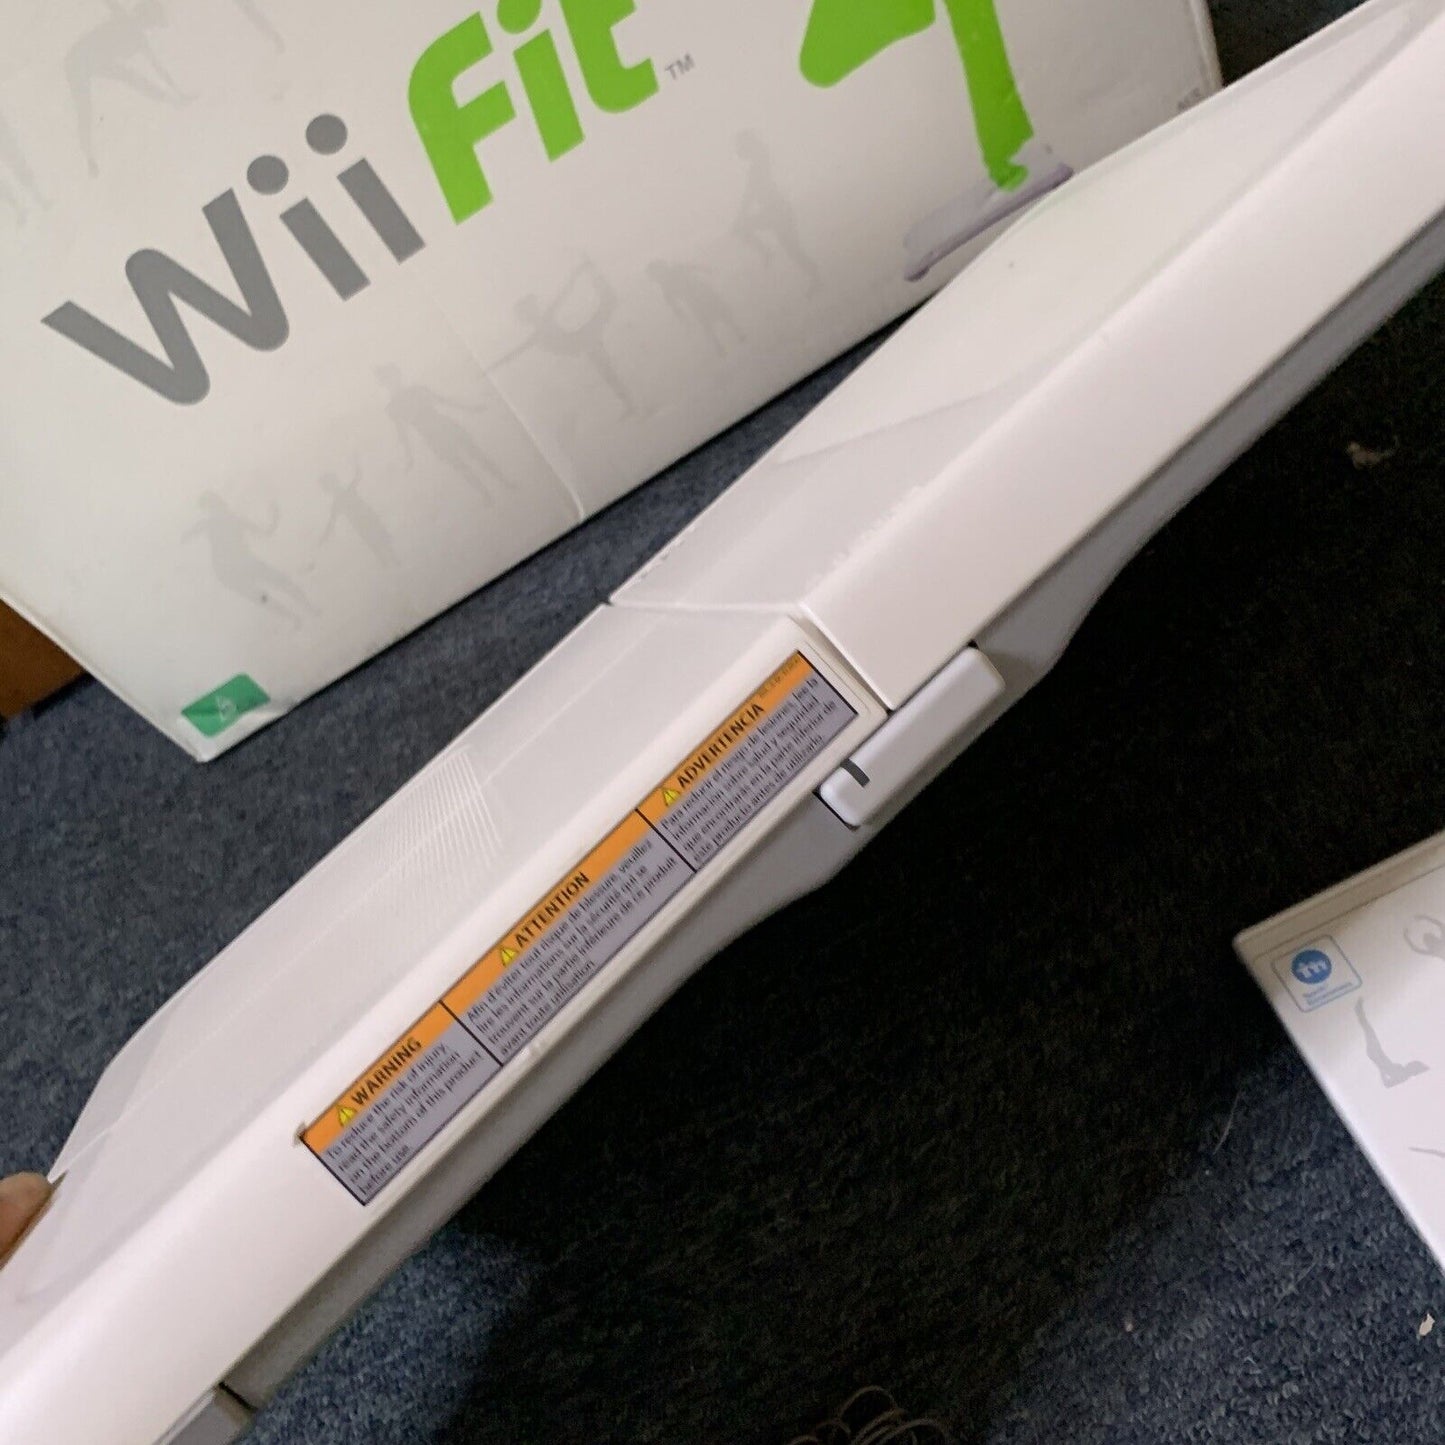 Nintendo Wii Fit Bundle with Balance Board